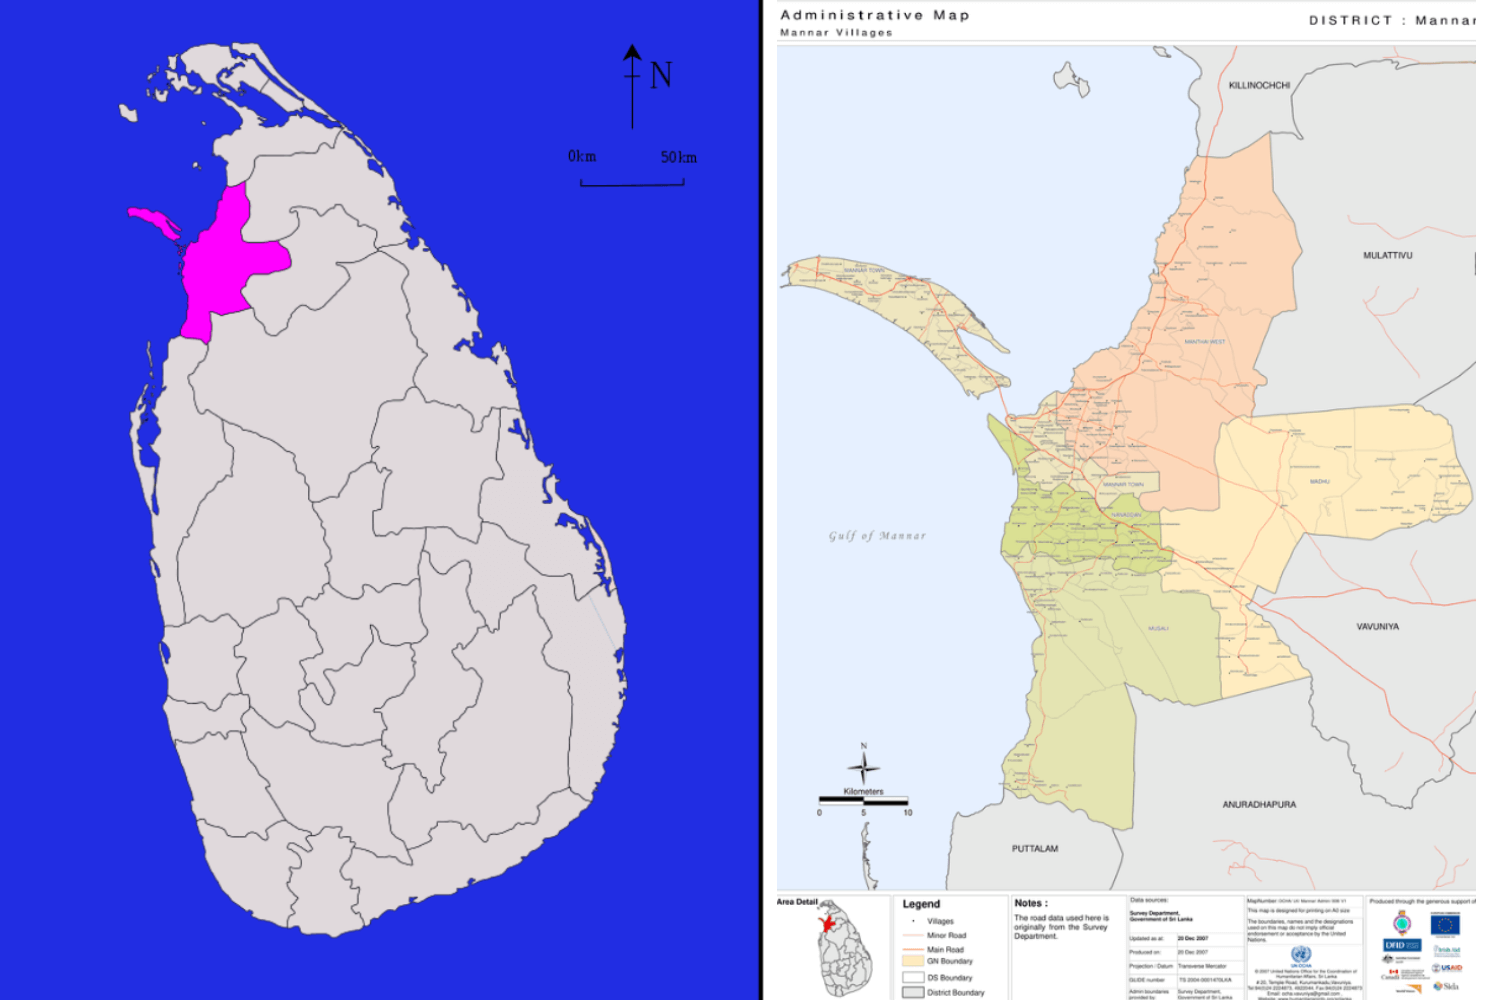 Mannar District Maps © Wikimedia Commons Treganrasu, 2007 United Nations Office for the Coordination of Humanitarian Affairs, Sri Lanka